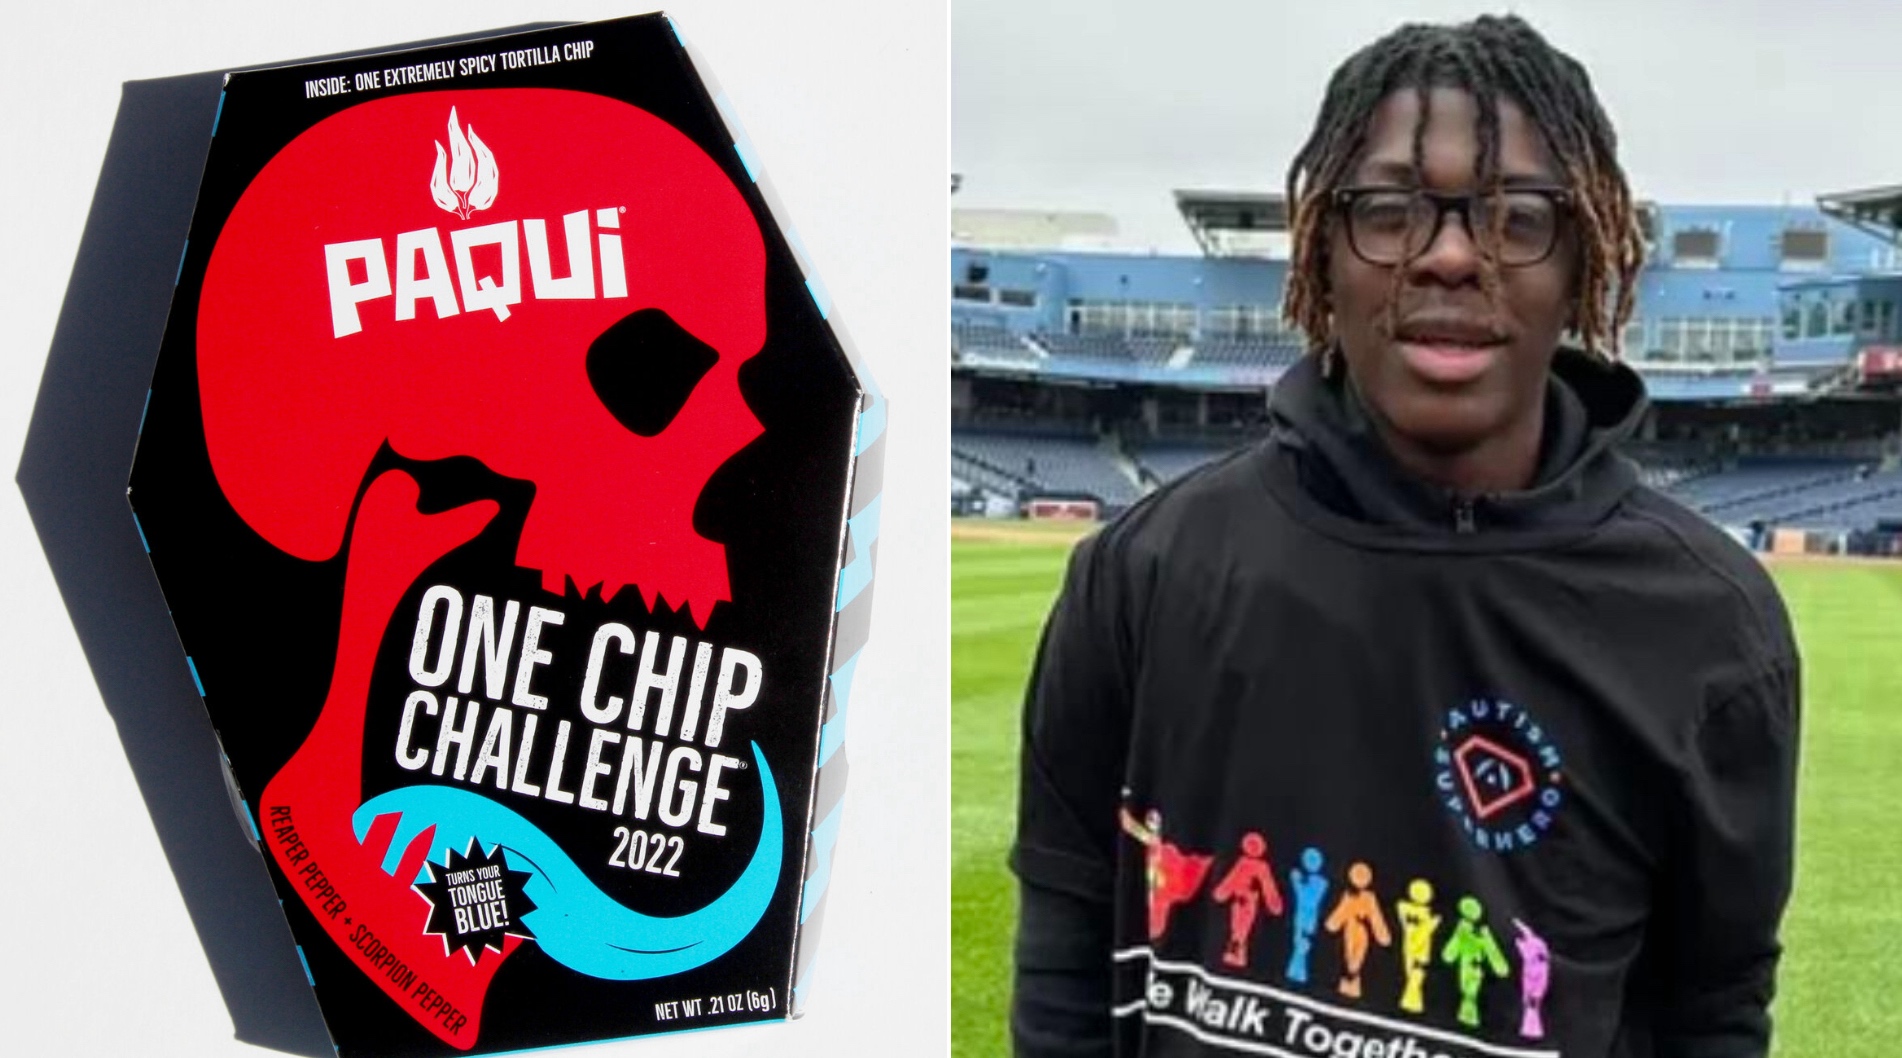 One Chip Challenge being pulled from shelves after death of teen, US News